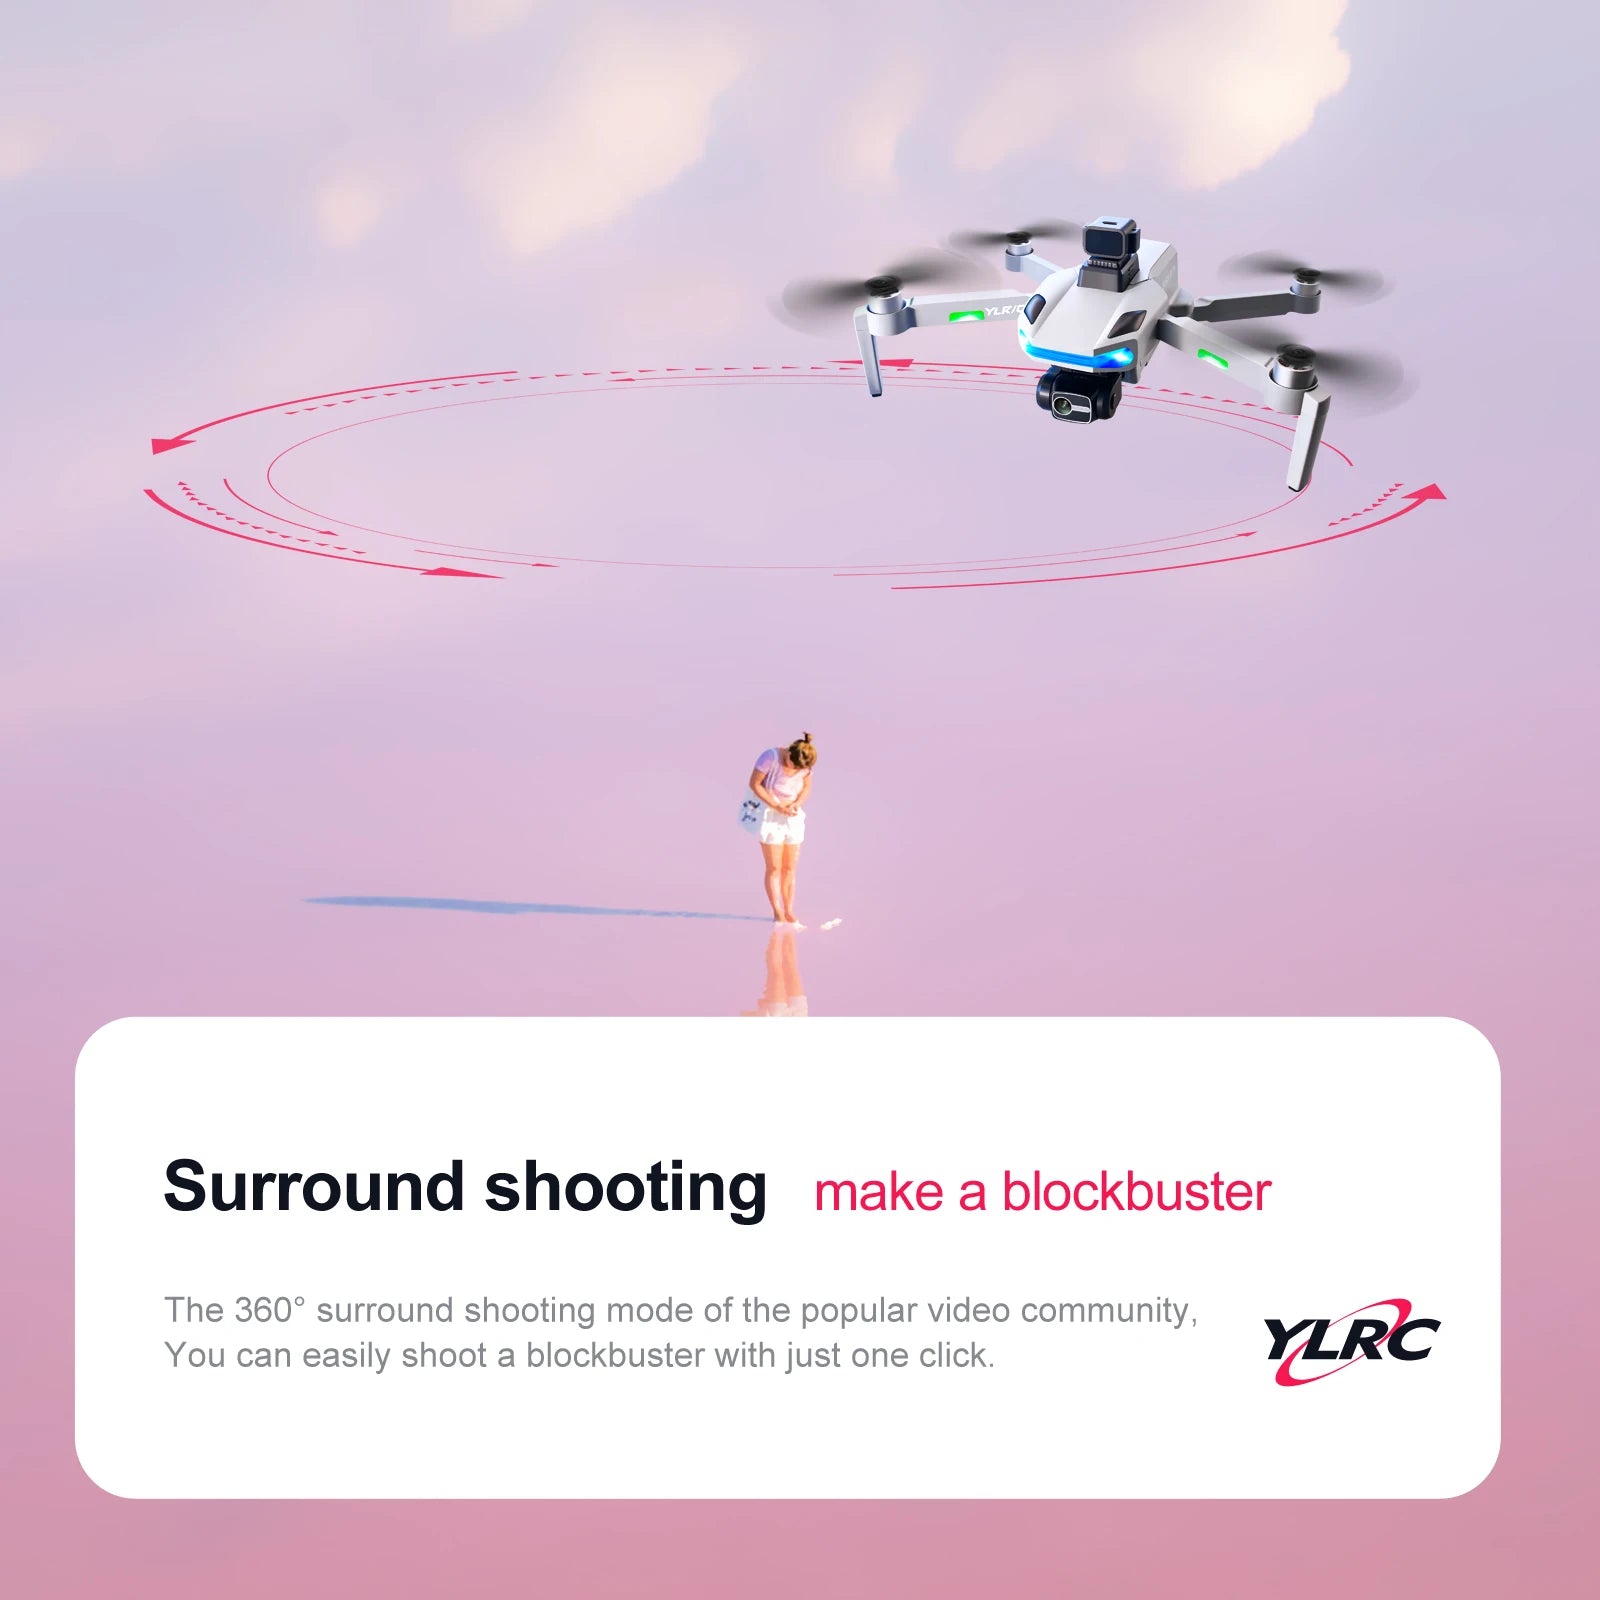 S135 Drone, YLRC surround shooting makes a blockbuster . ylrc